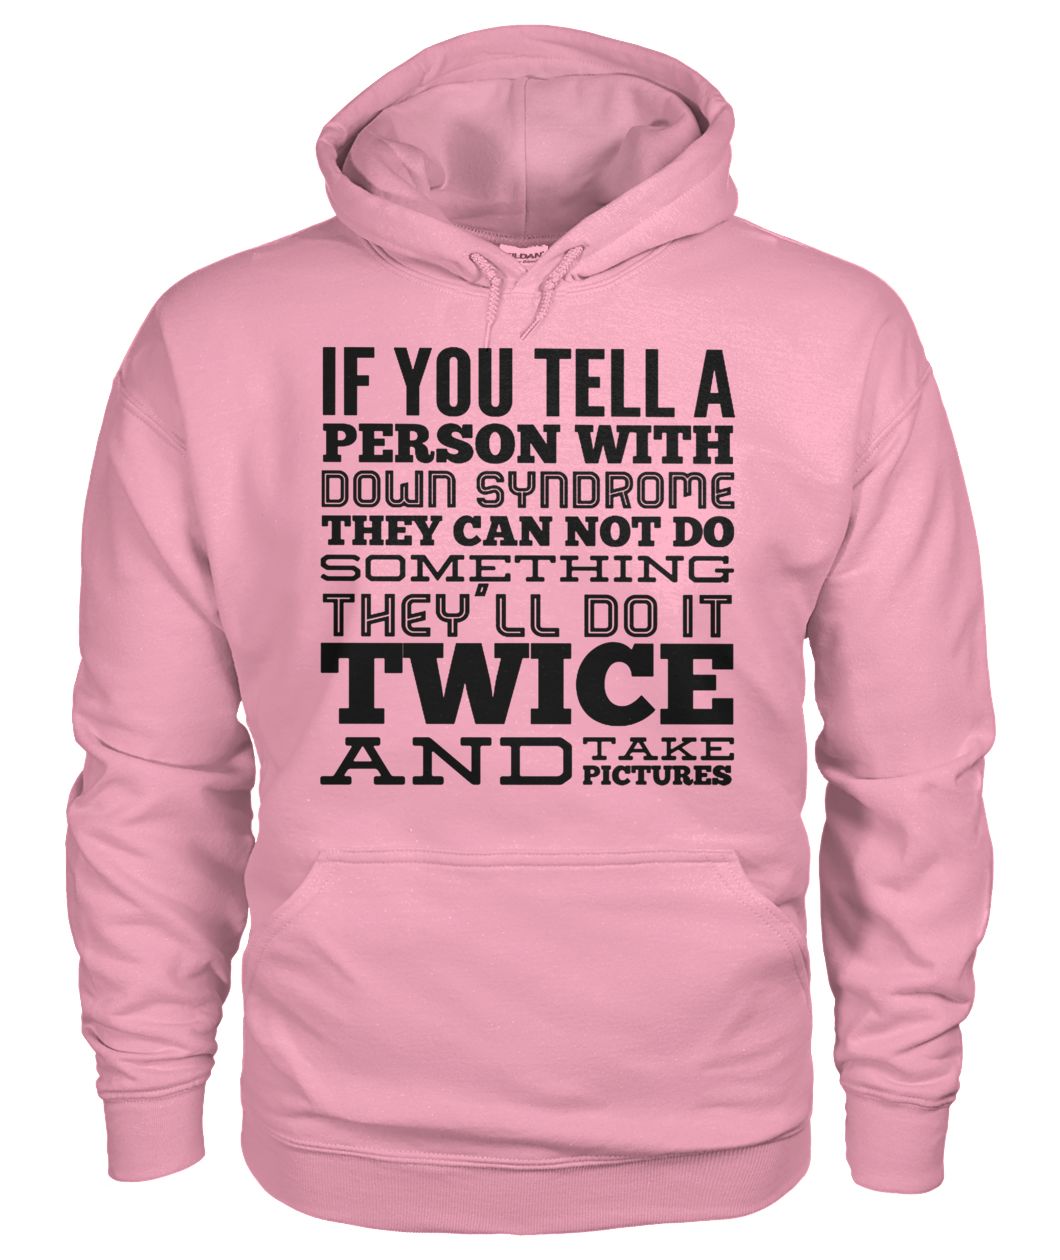 If you tell a person with down syndrome they can not do something gildan hoodie